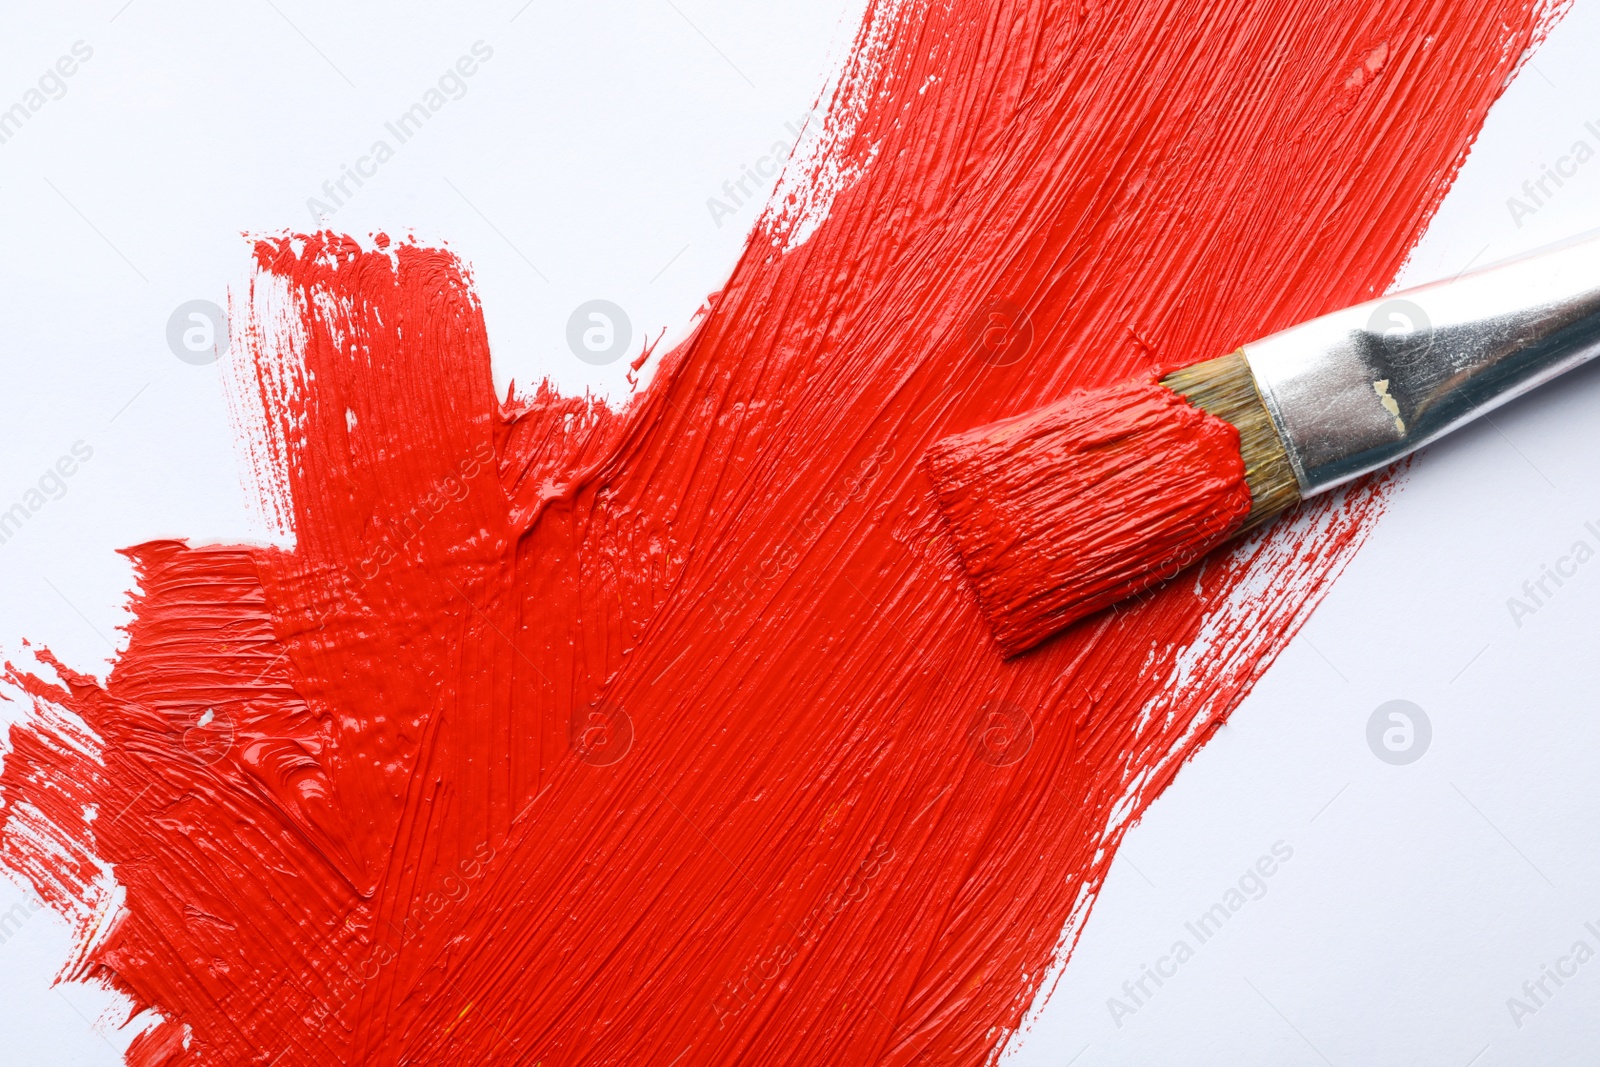 Photo of Paint stroke and brush on white background, top view